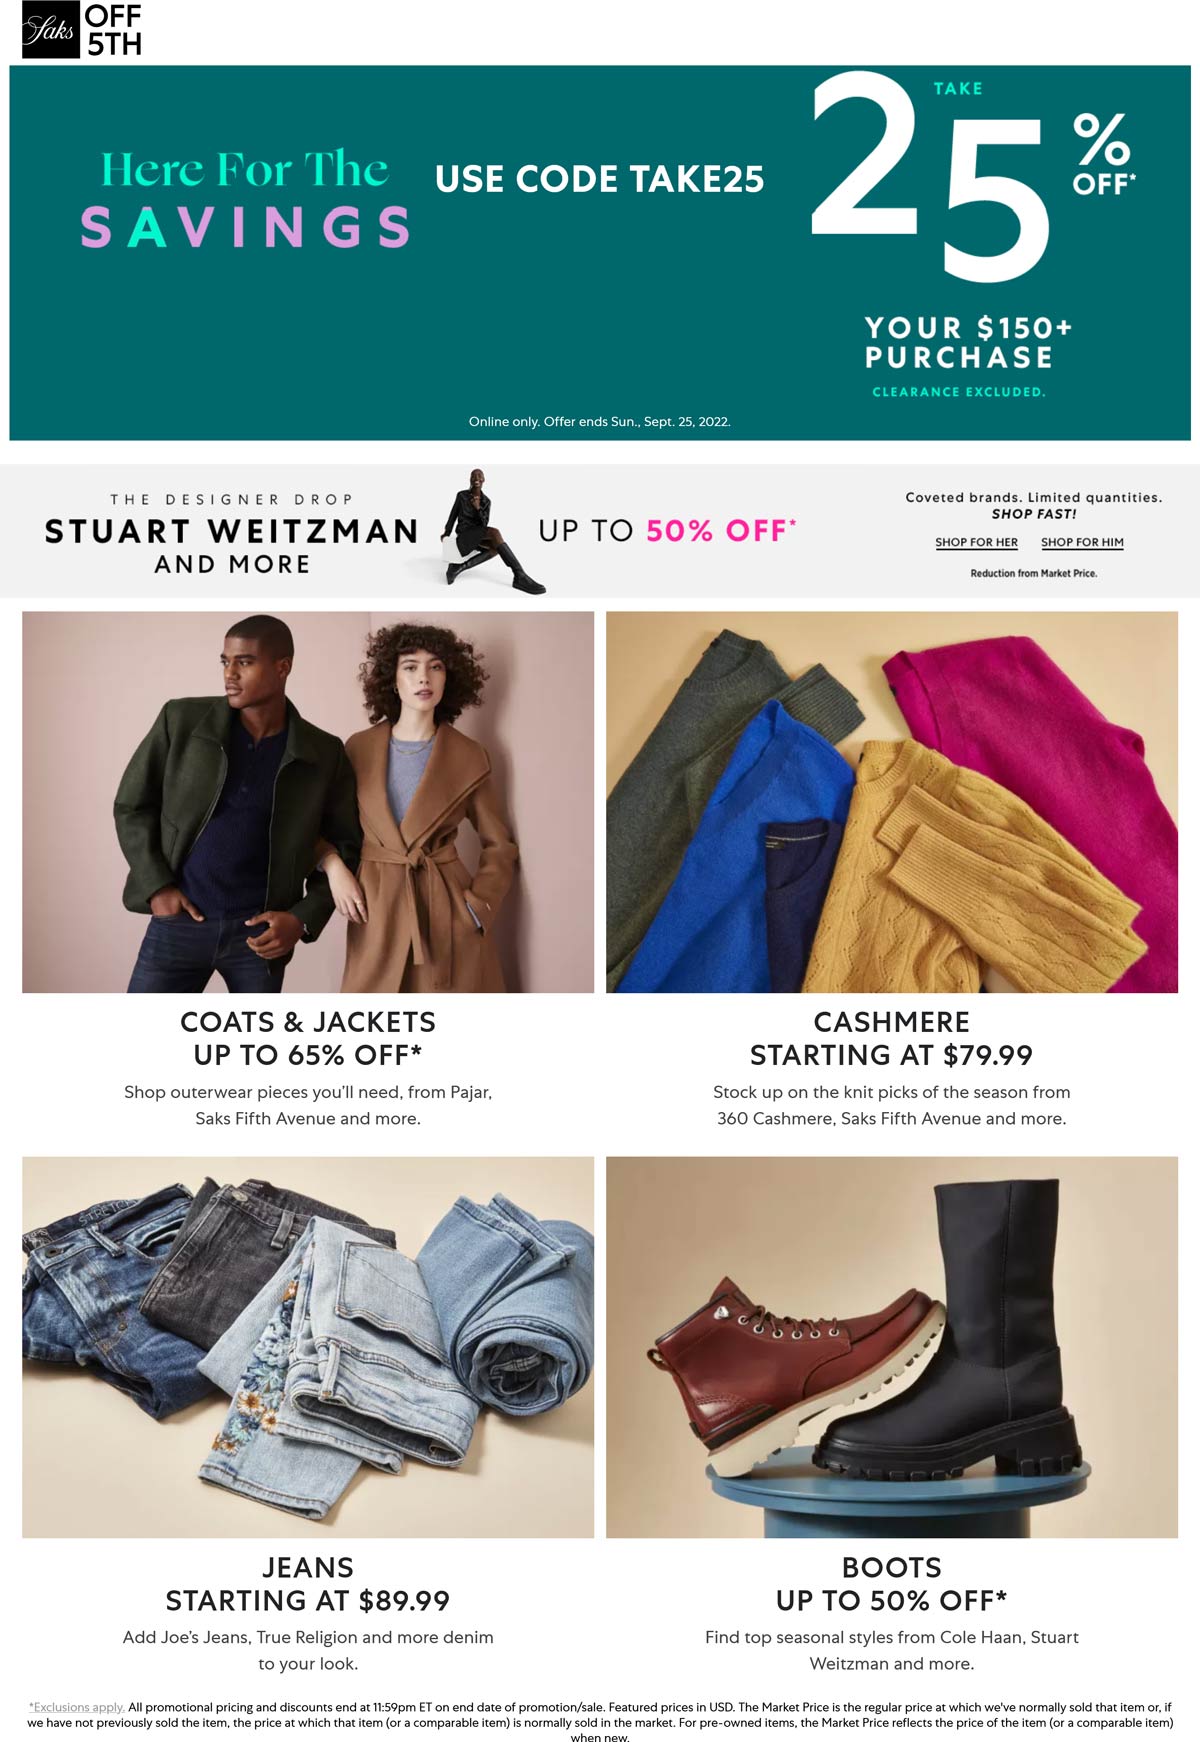 OFF 5TH stores Coupon  25% off $150 online at Saks OFF 5TH via promo code TAKE25 #off5th 